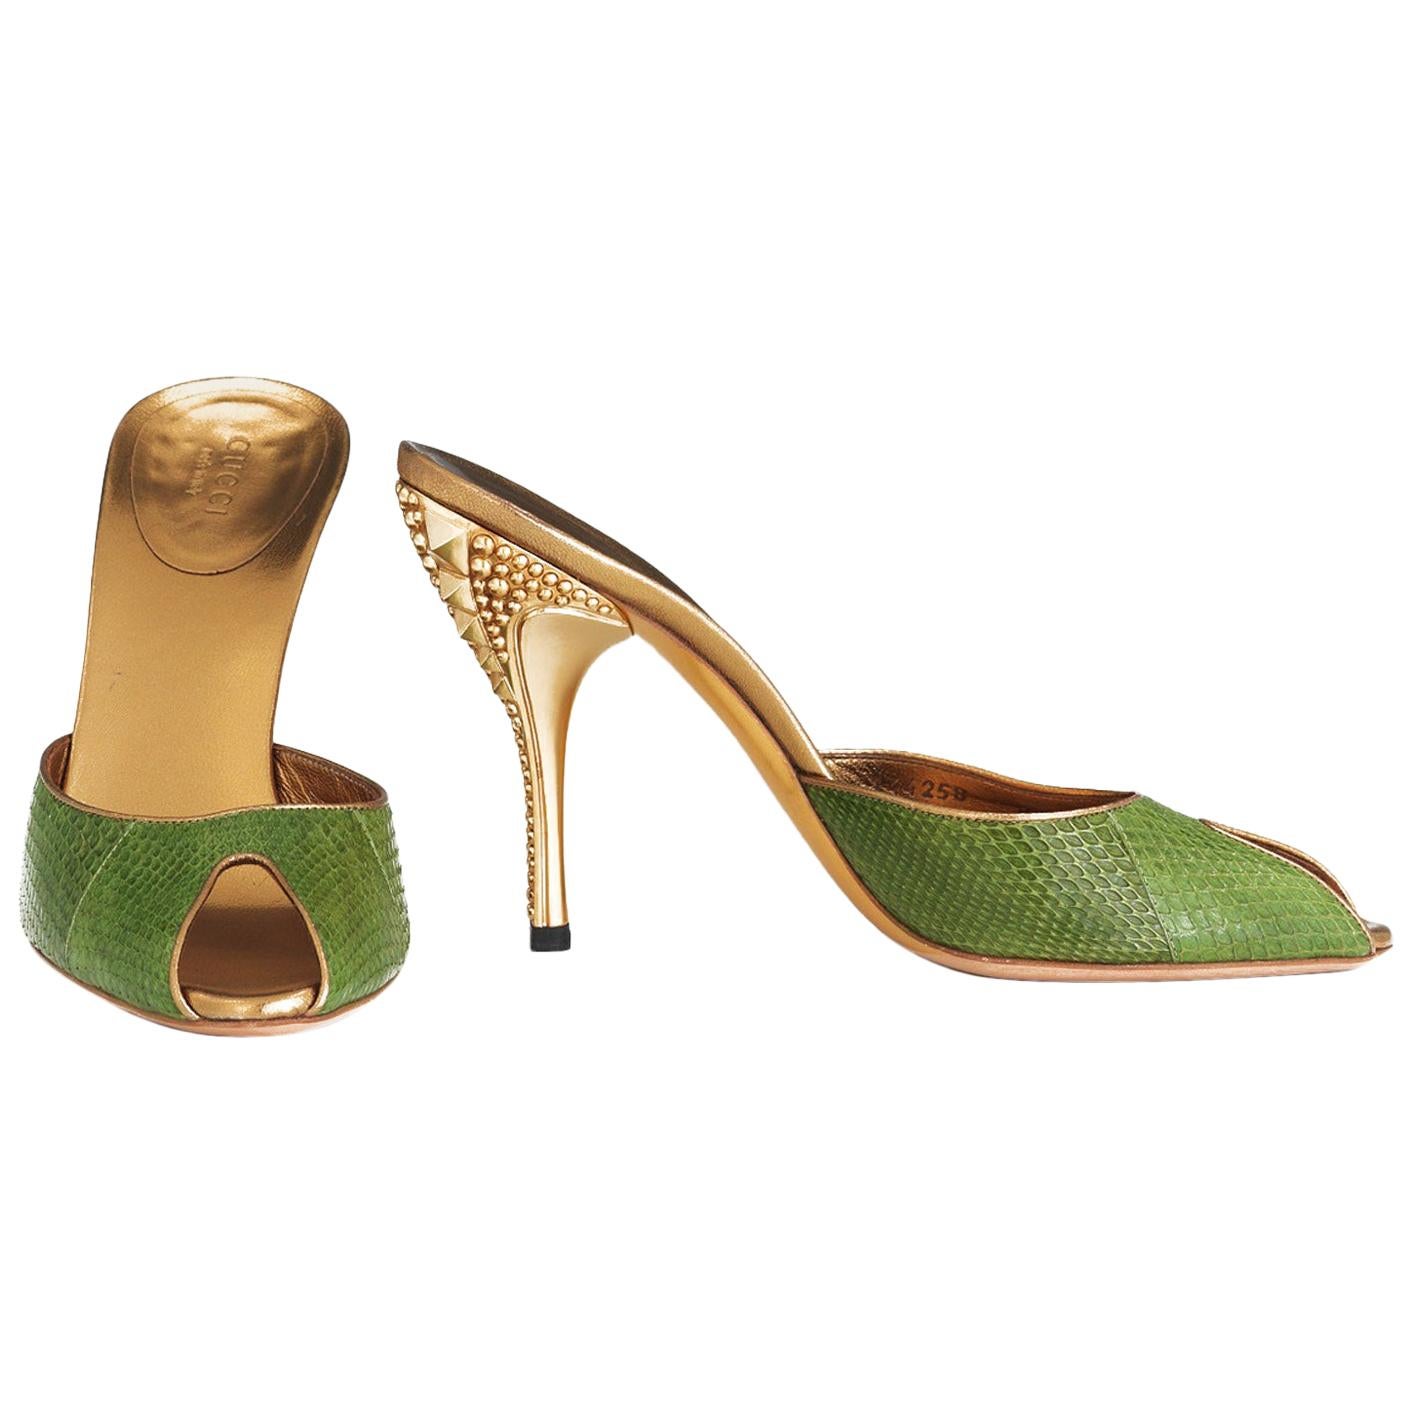 New Tom Ford for Gucci Studded Green Gold Runway Heels Shoes Mules 37 B  US 7 B For Sale